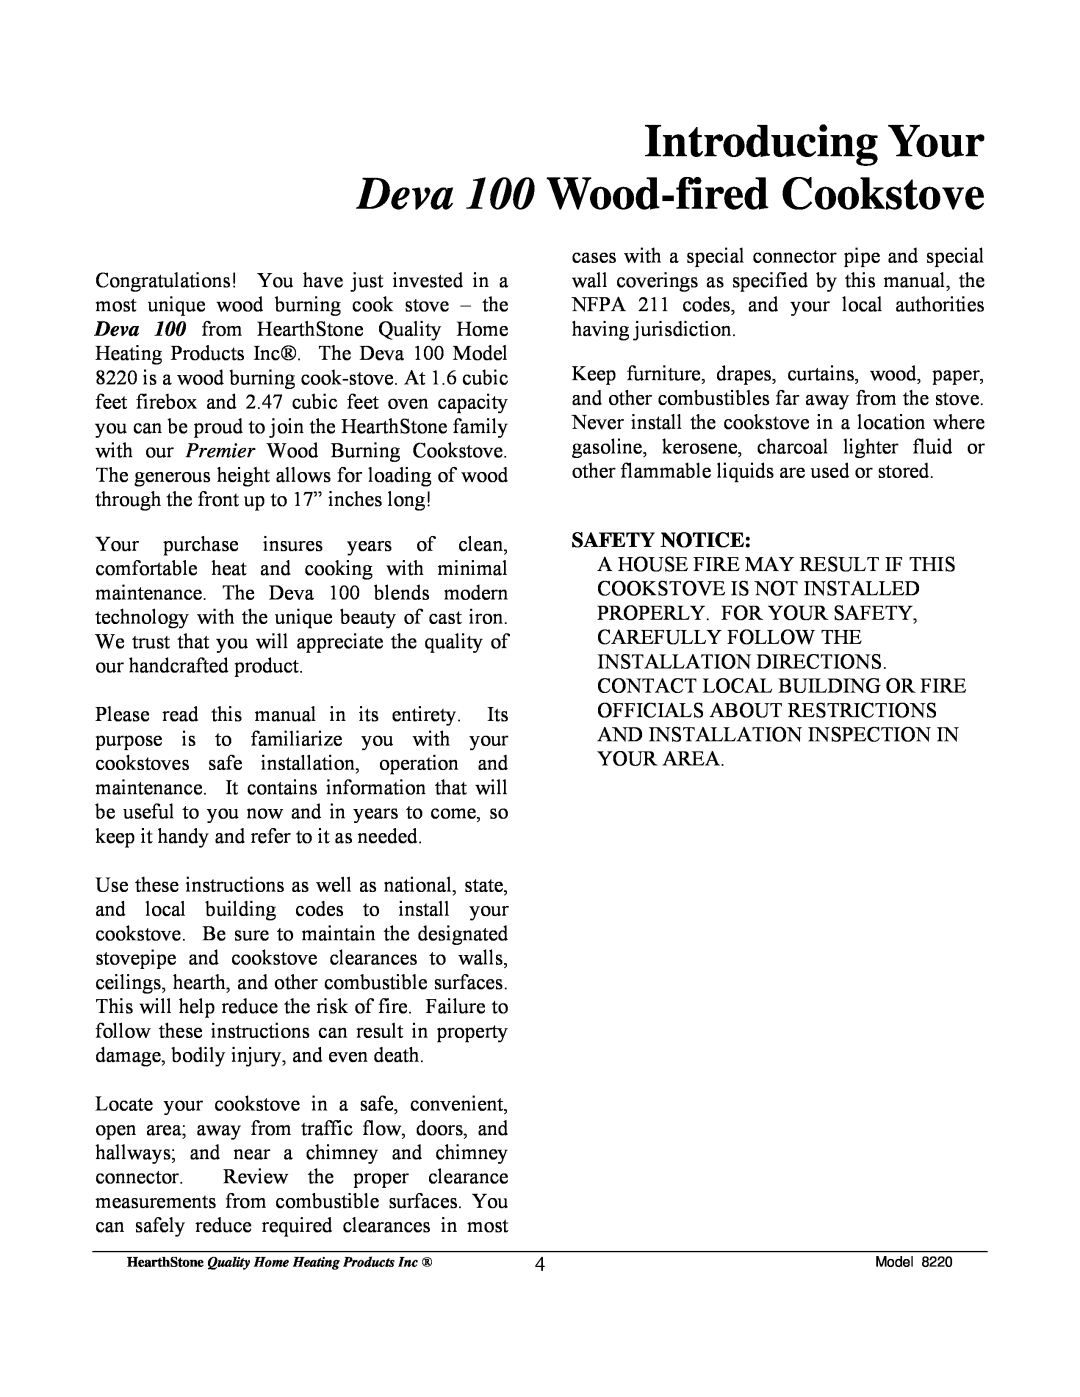 Weiman Products owner manual Introducing Your Deva 100 Wood-firedCookstove, Safety Notice 